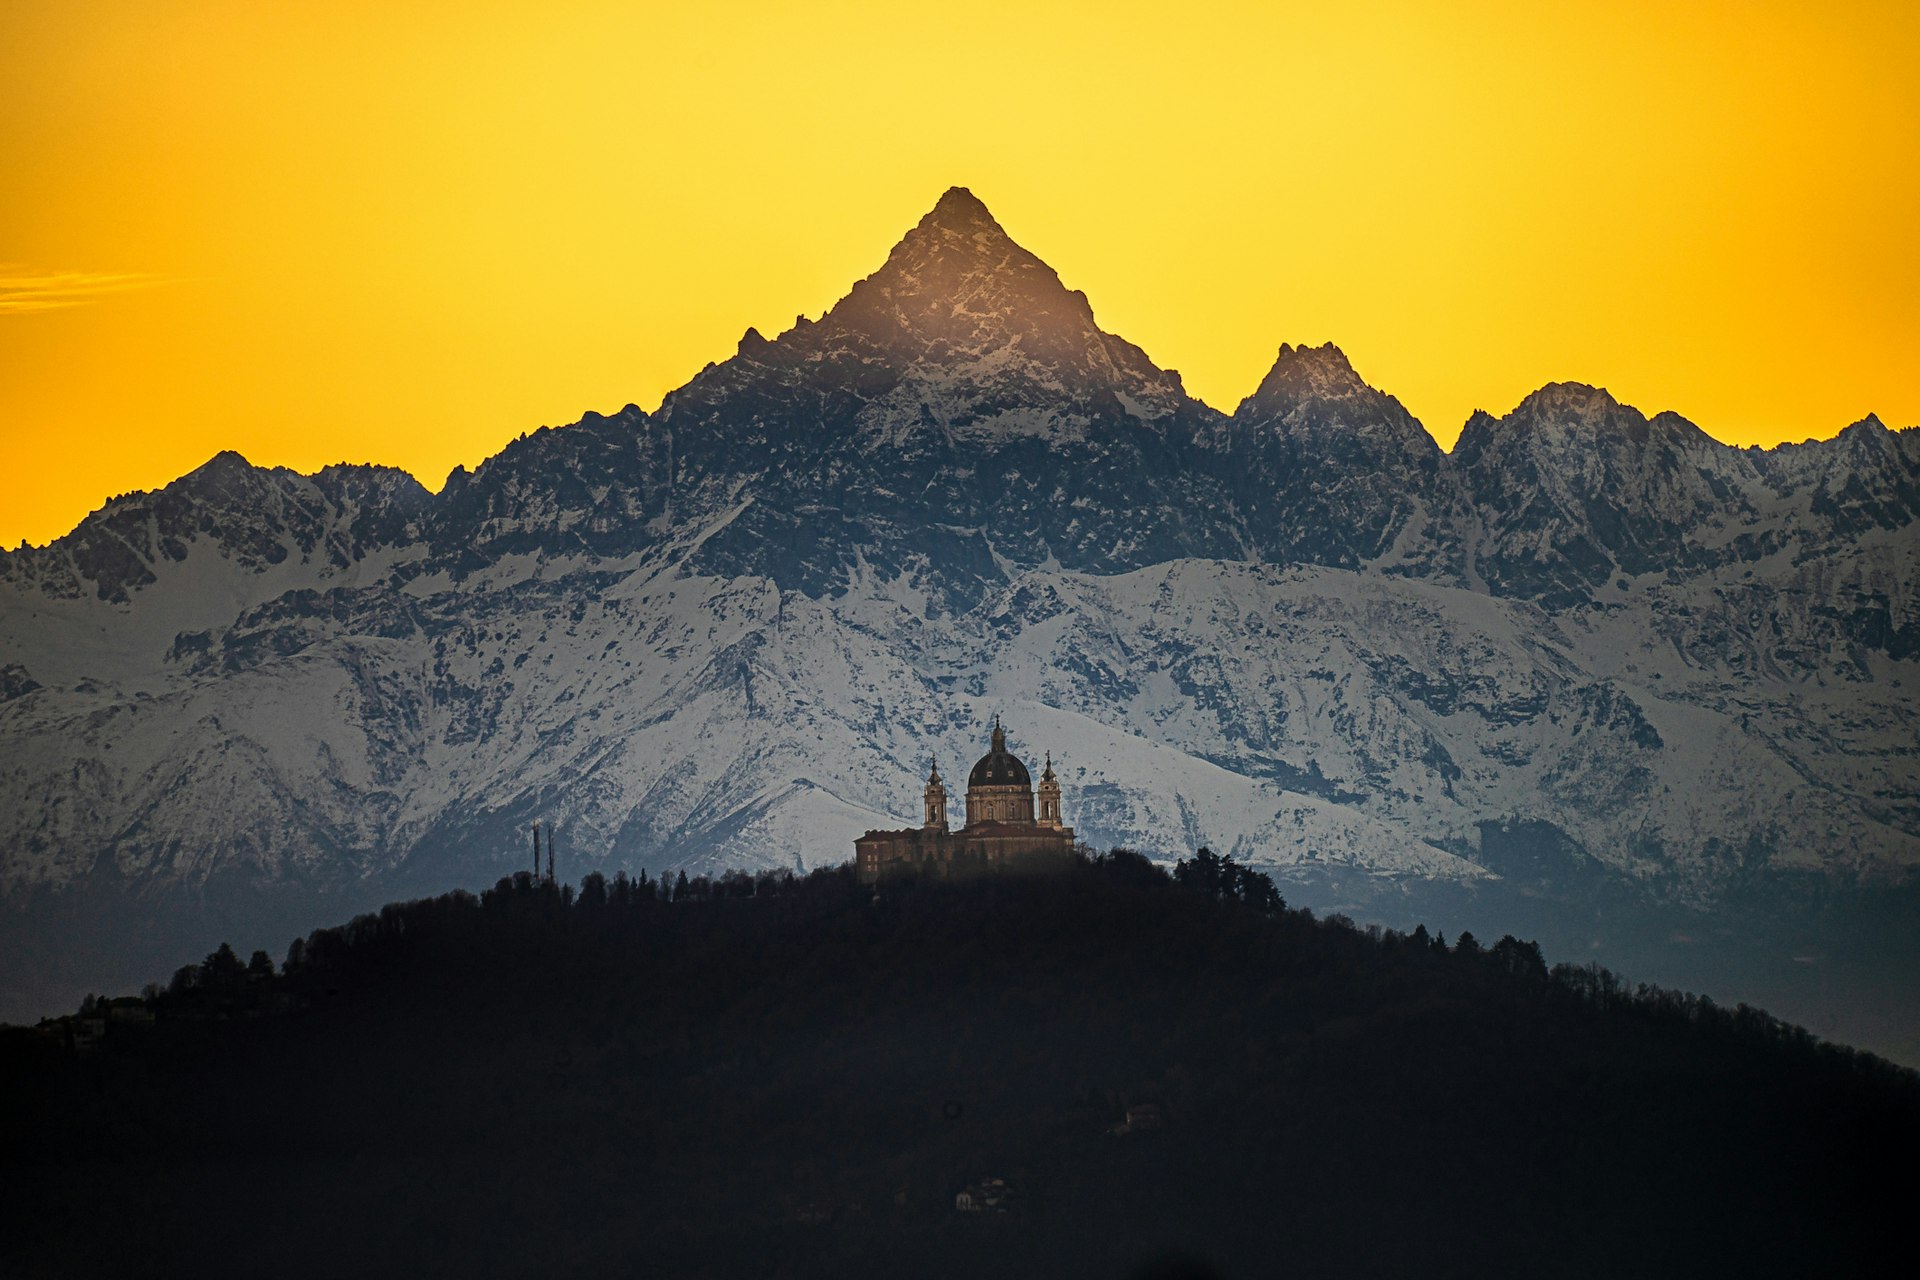 landscape photo of the Basilica of Superga with the Monviso mountains in the background at sunset, casting a wonderful hue of yellow